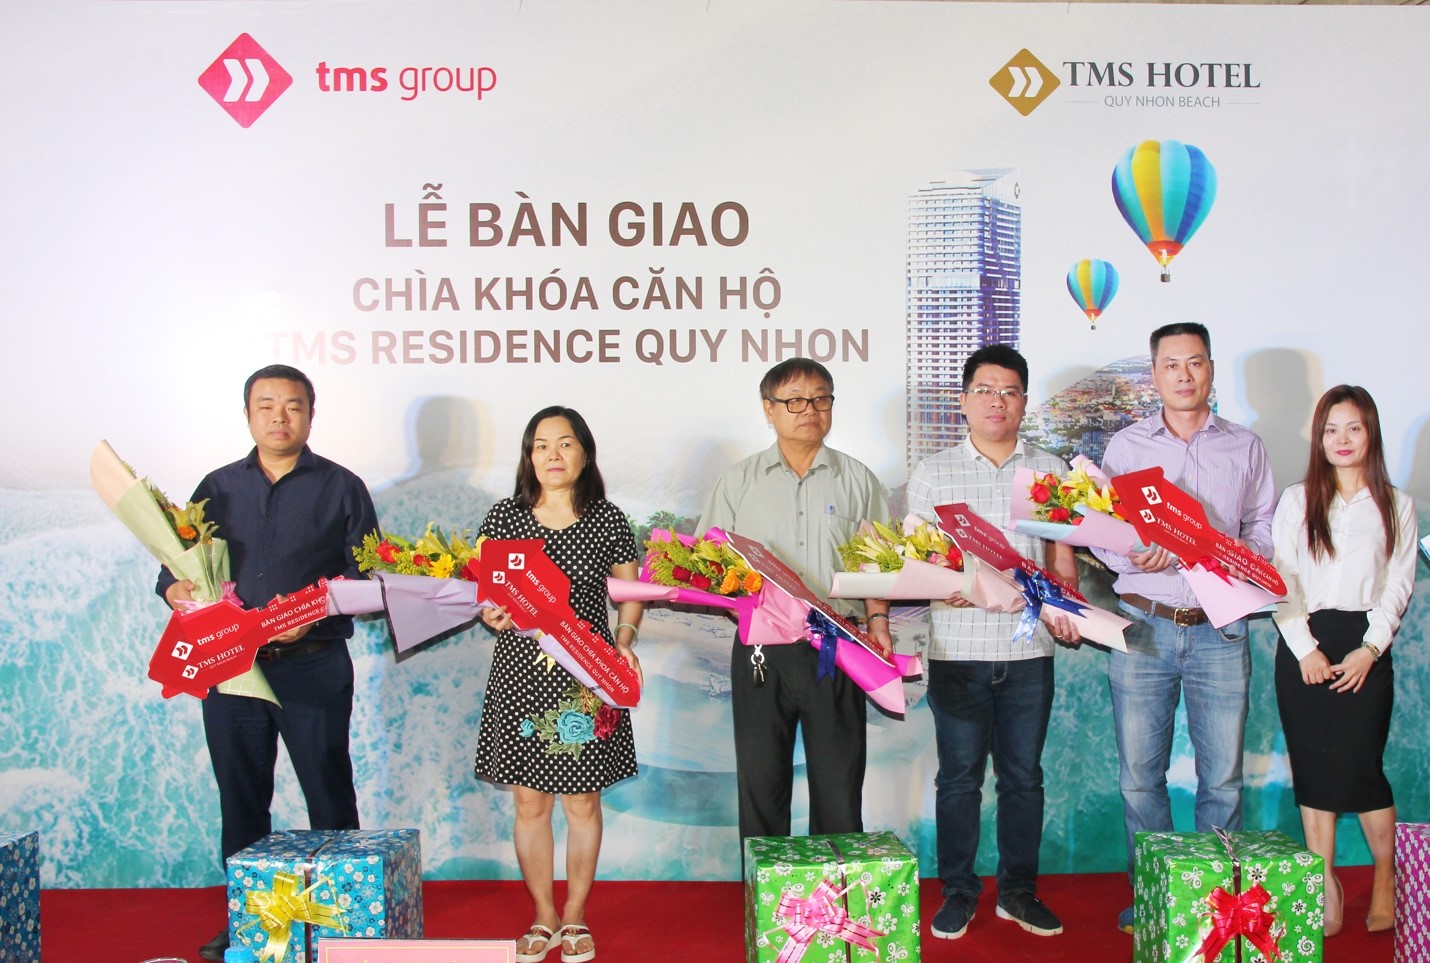 TMS Hotel Quy Nhon Beach hands over apartments to first clients